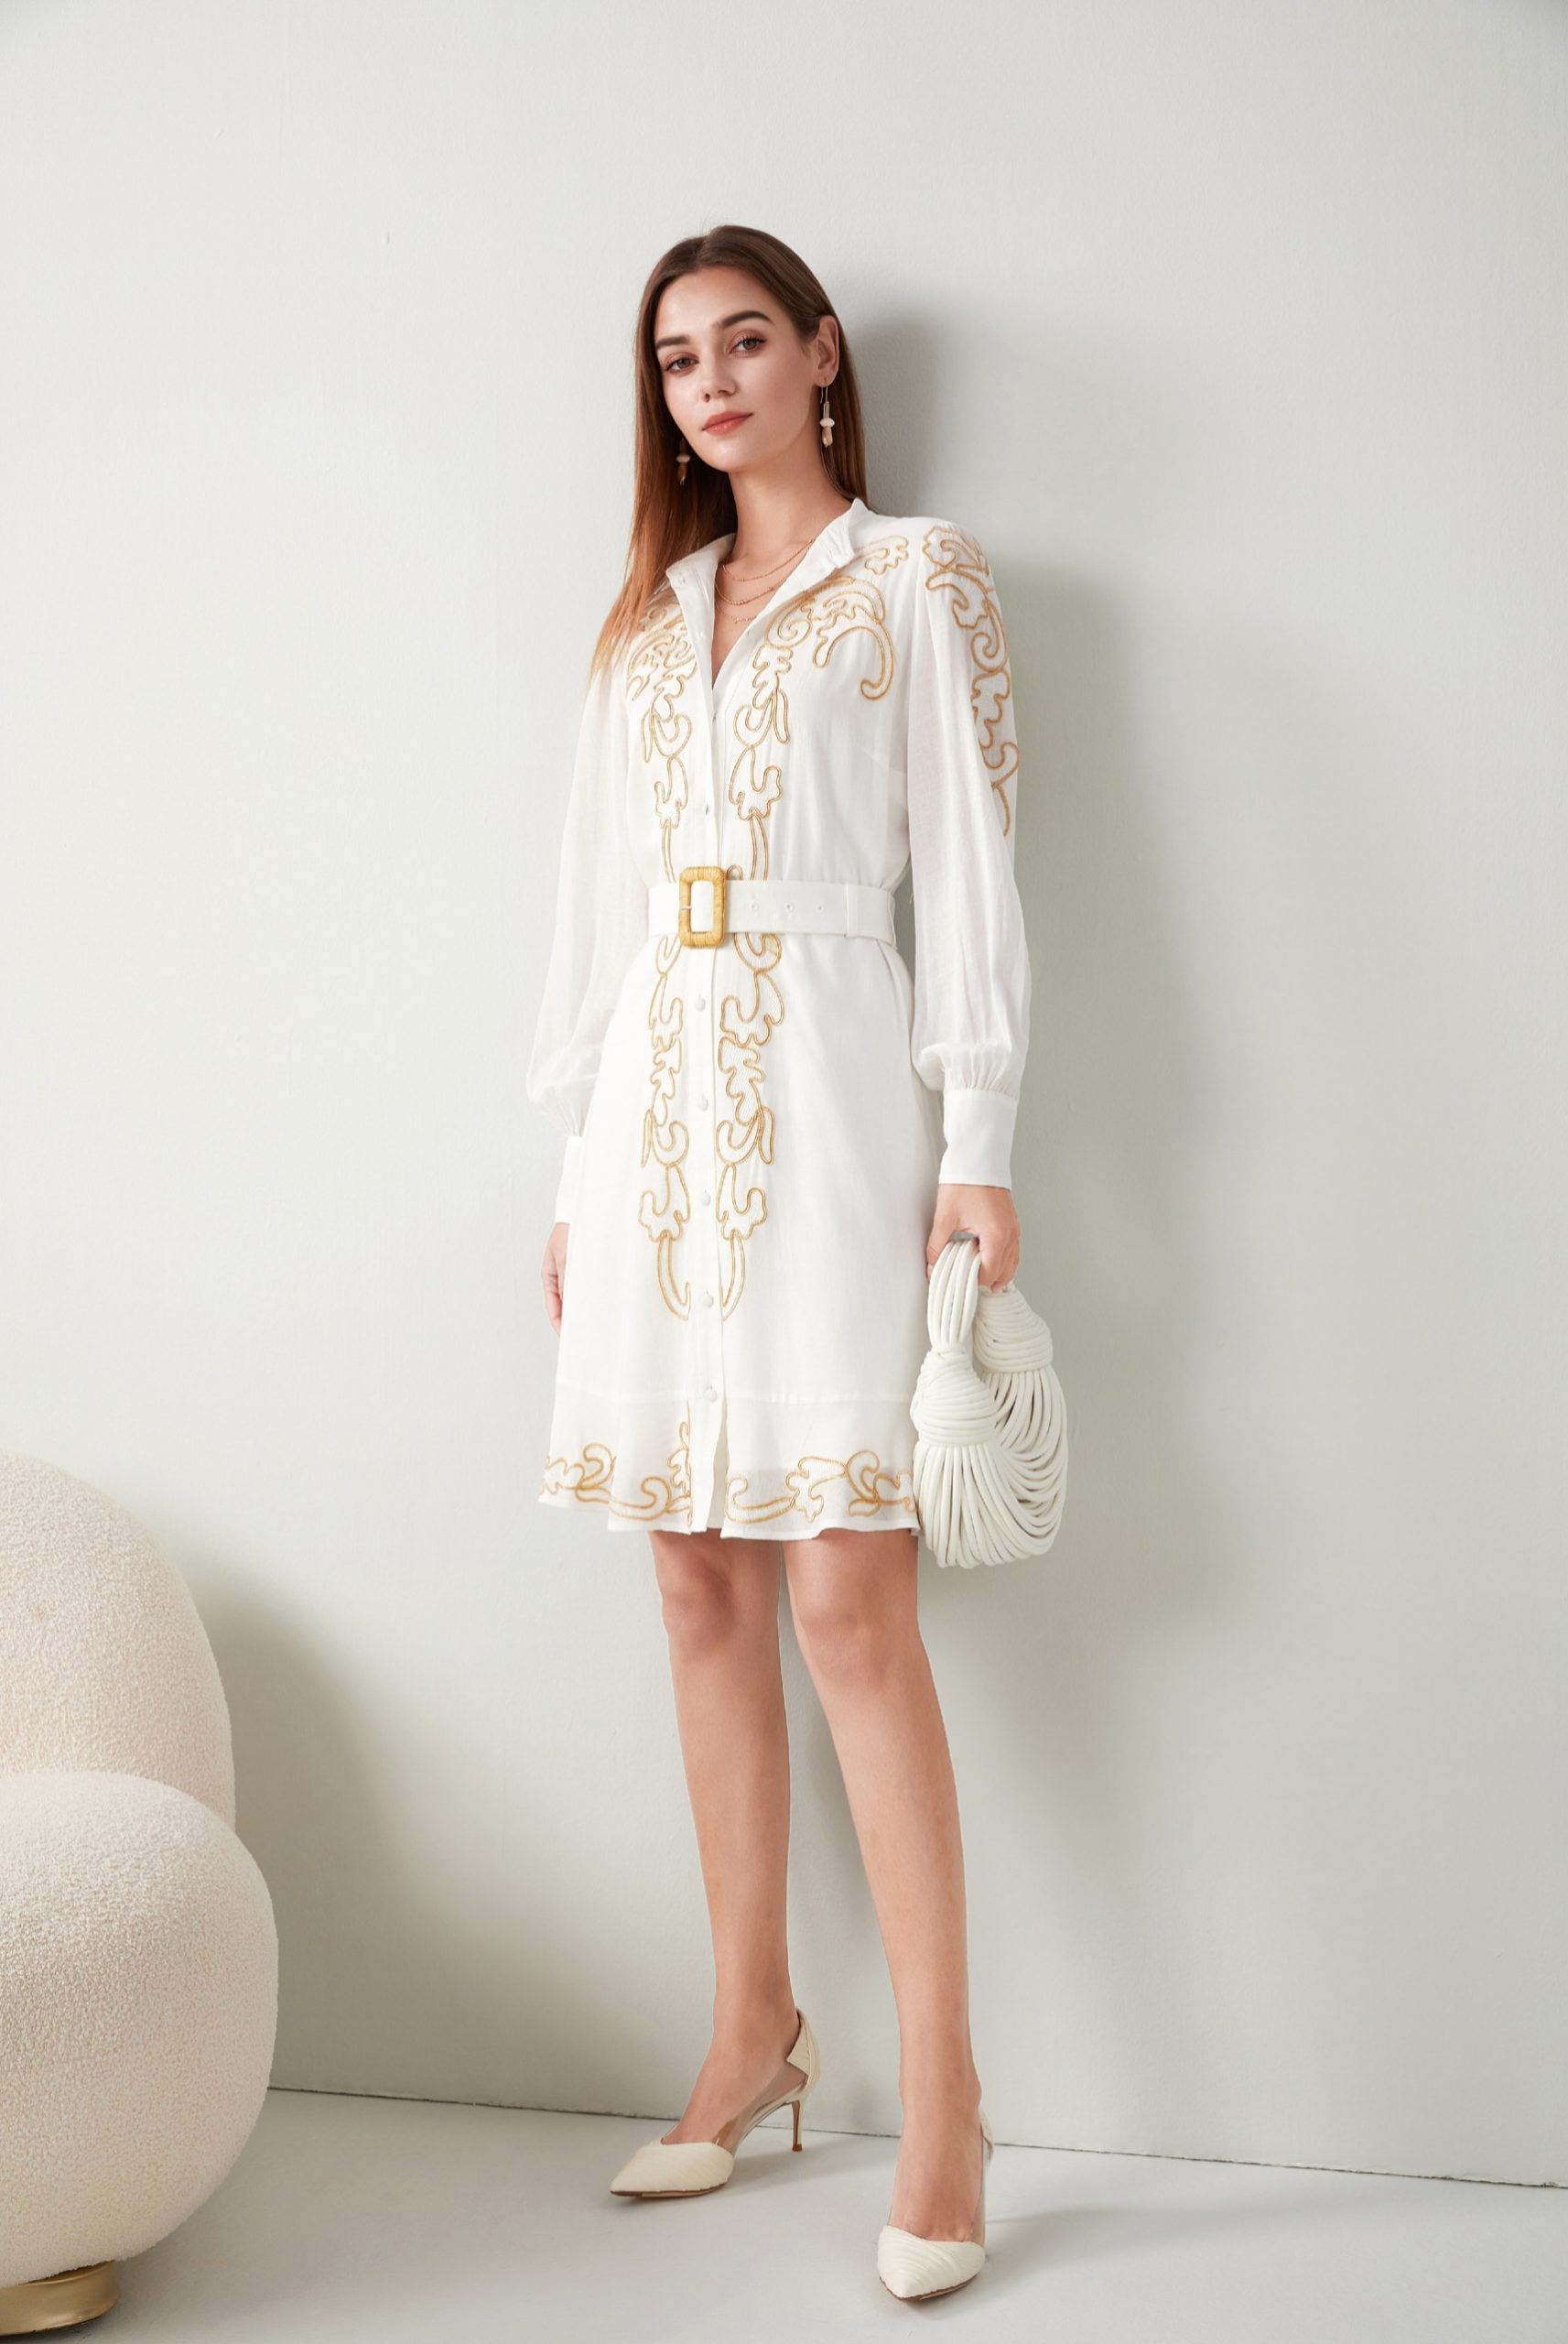 &quot;Effortlessly chic: Short white dress adorned with delicate embroidery. Shop now!&quot;